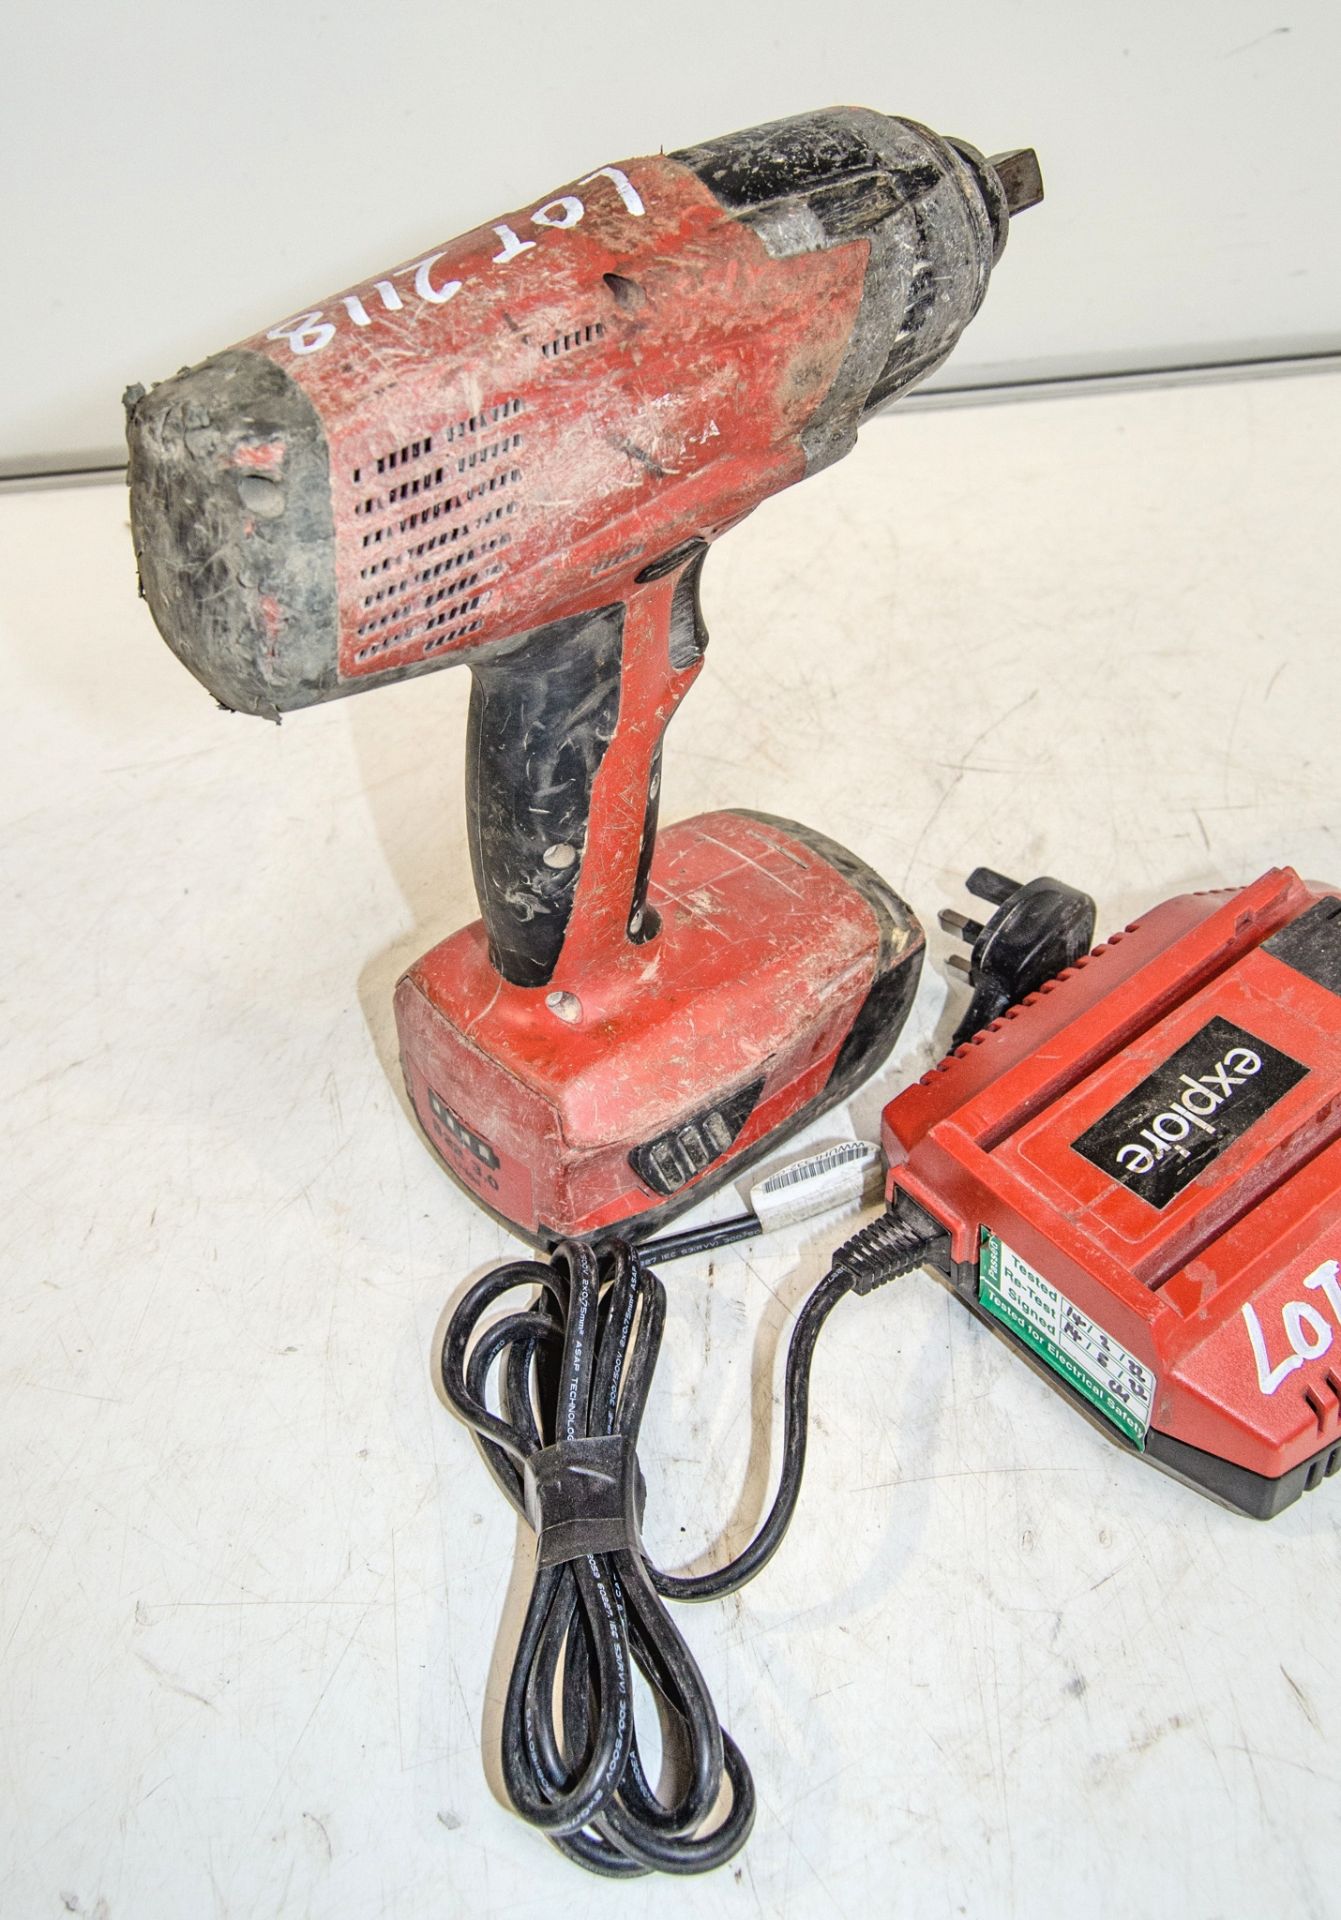 Hilti 22v cordless 1/2 inch drive impact gun c/w battery & charger CIW239 - Image 2 of 2